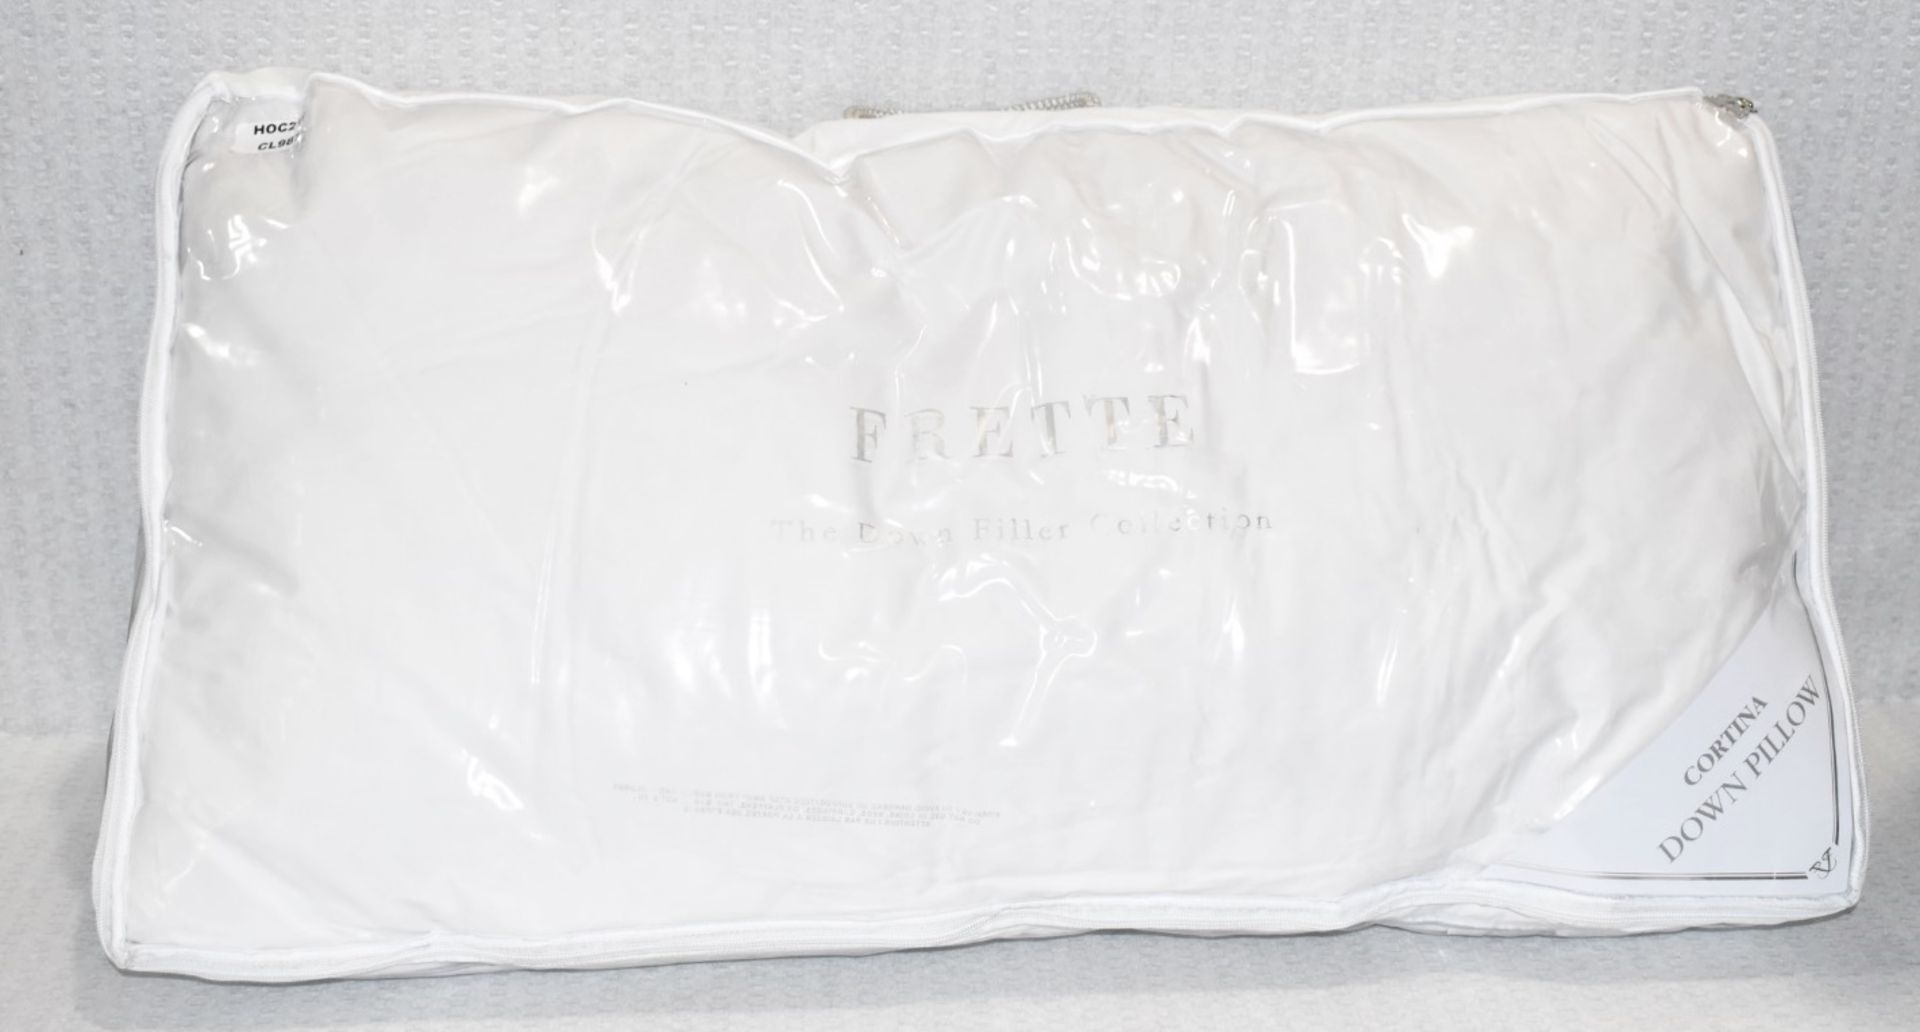 1 x FRETTE 'Cortina' Luxury Goose Down Kingsize Soft Pillow in White, 54cm x 94cm - RRP £670.00 - Image 2 of 9